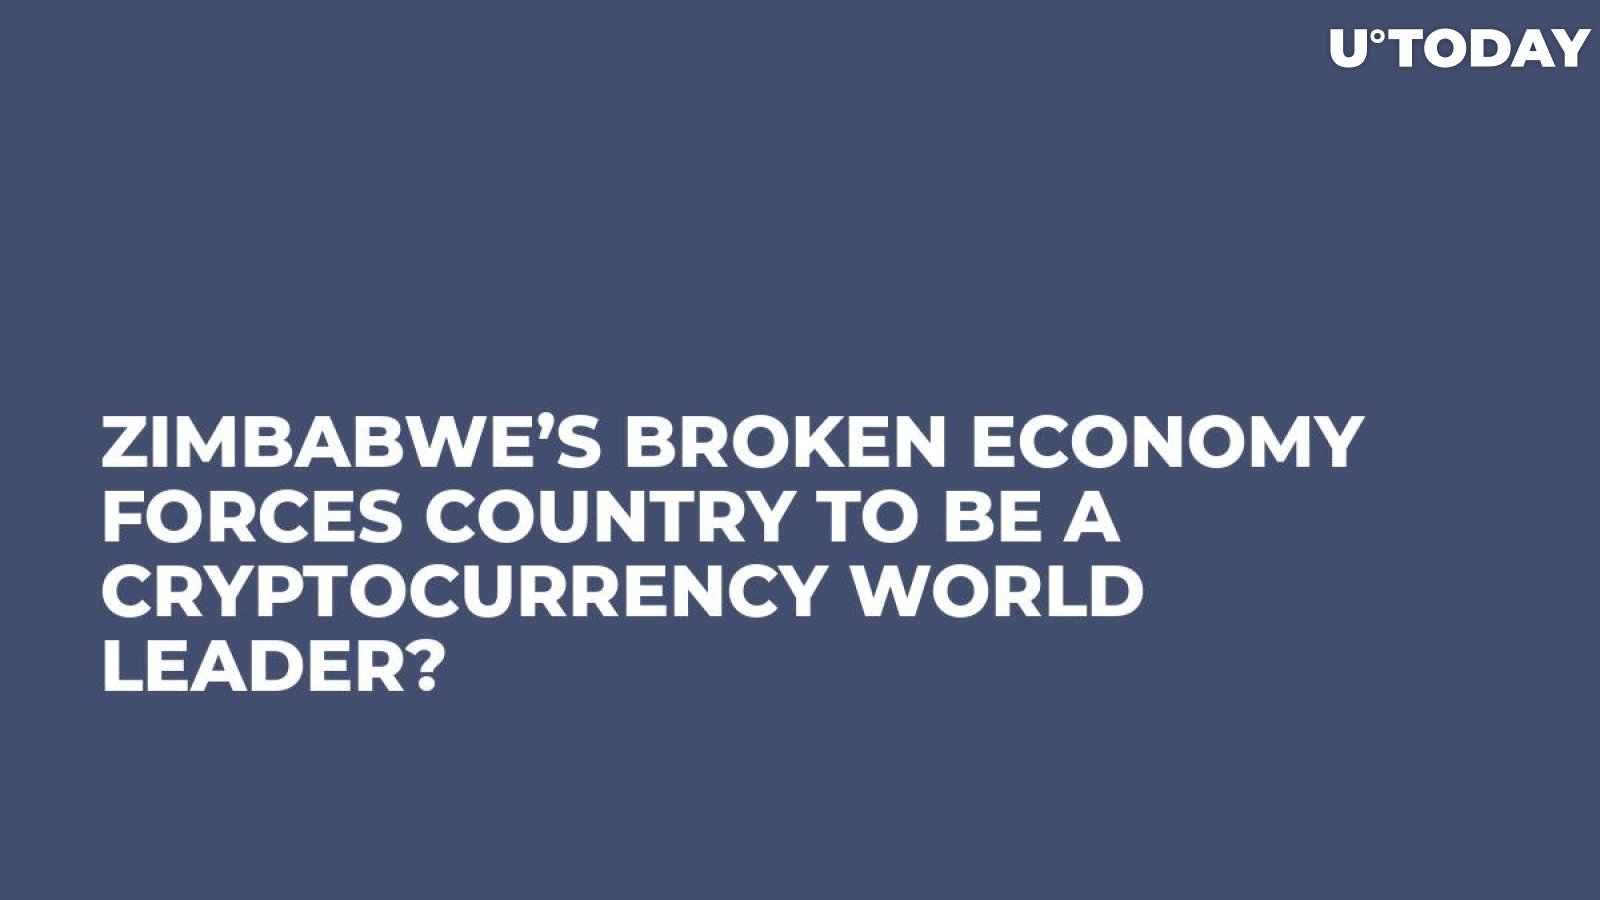 Zimbabwe’s Broken Economy Forces Country to be a Cryptocurrency World Leader?